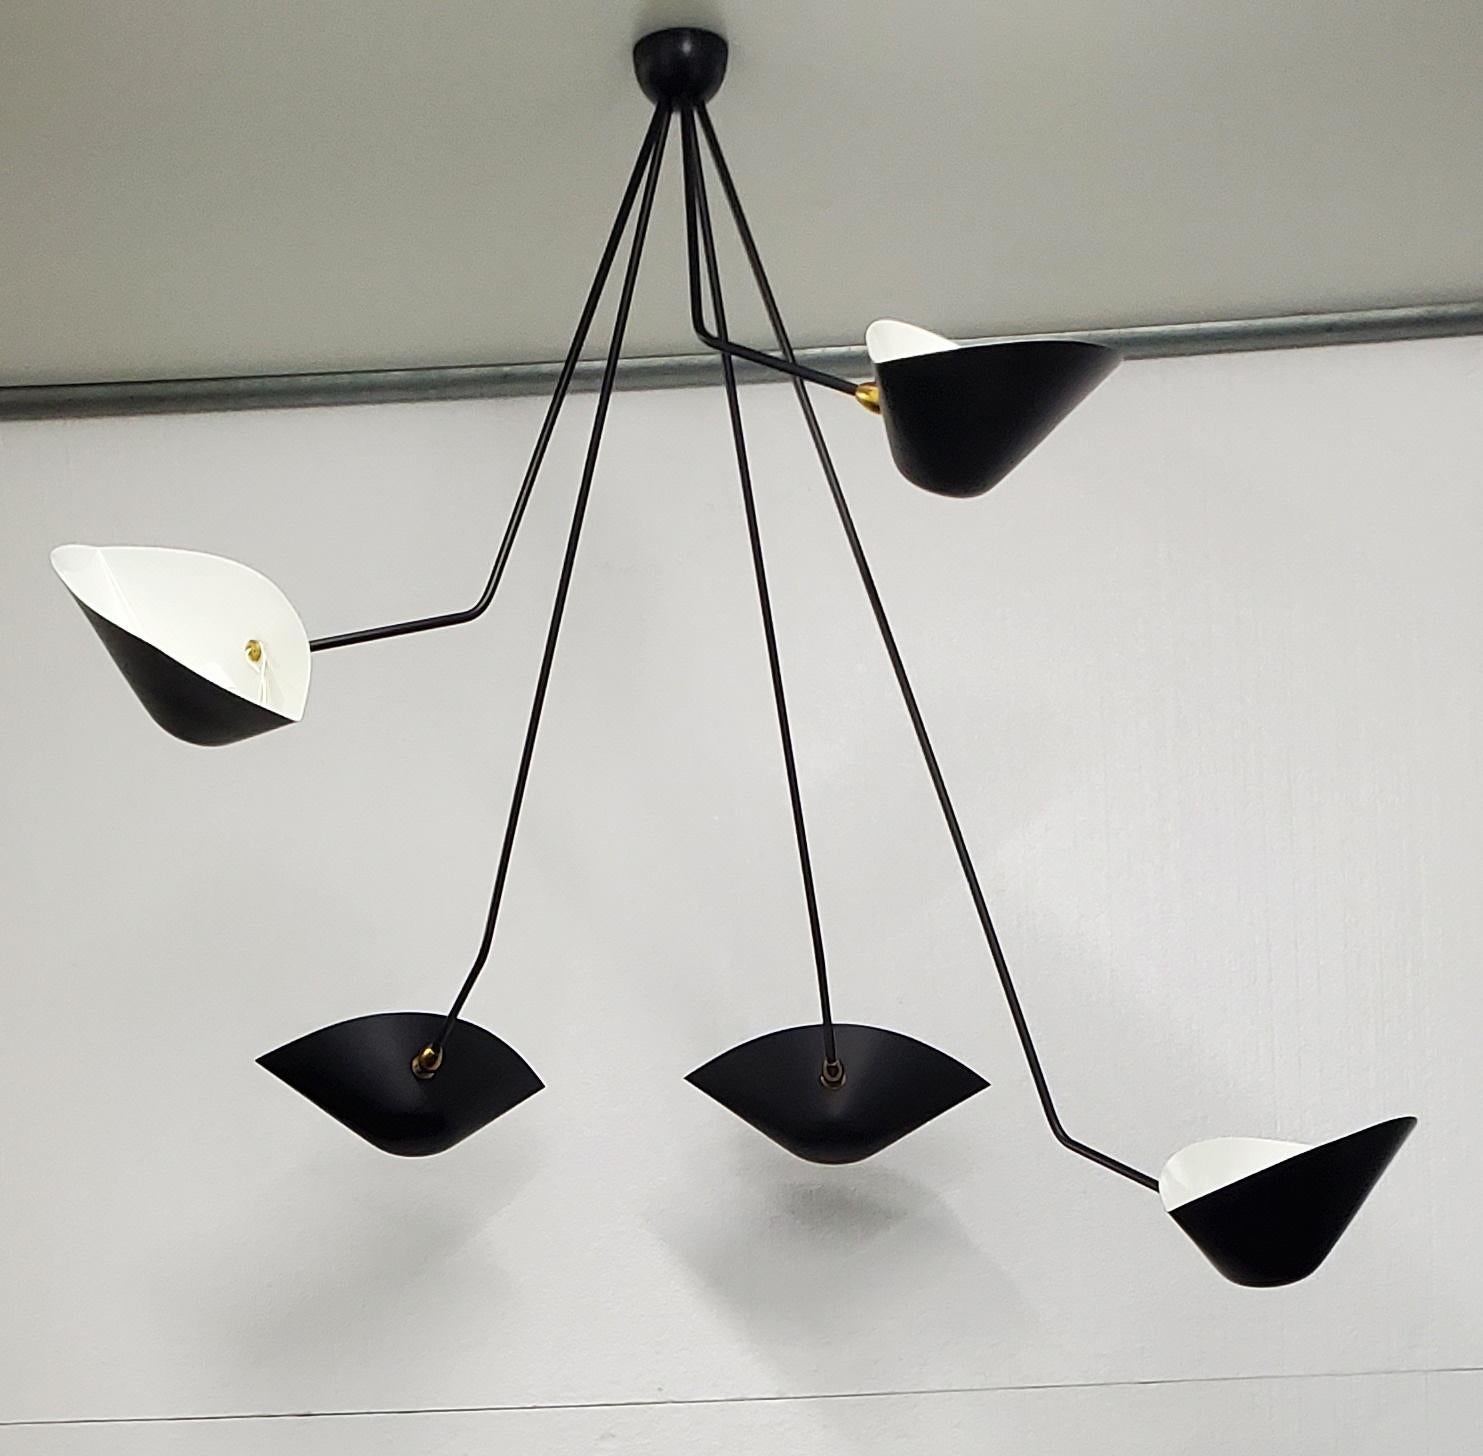 Serge Mouille - Spider Ceiling Lamp with 5 Falling Arms in Black For Sale 2